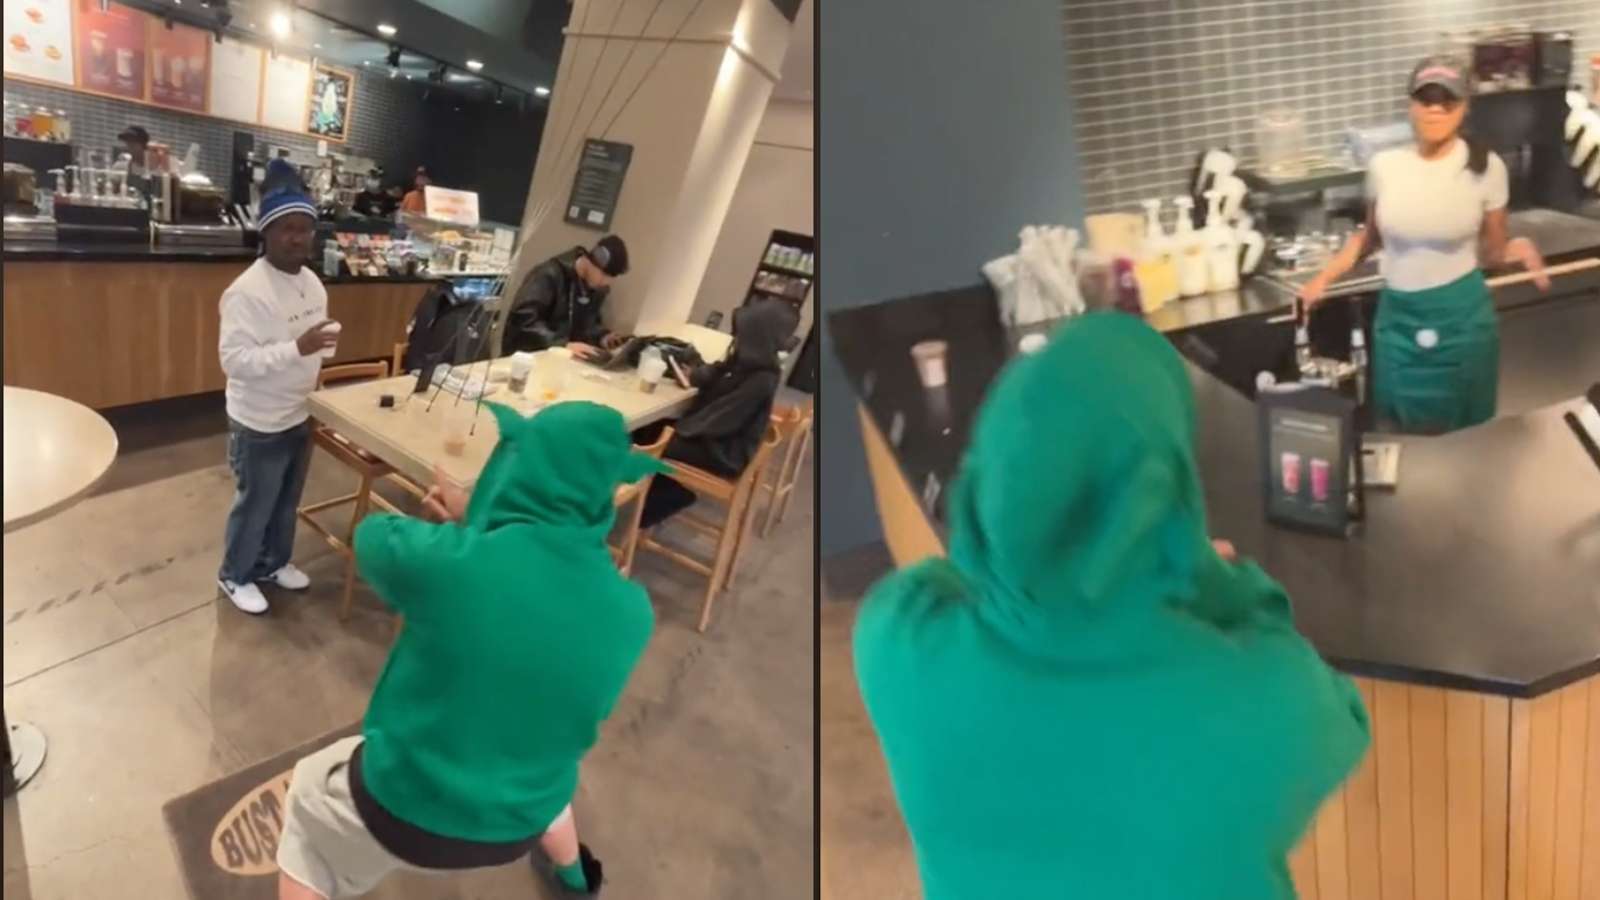 In this image, we see a TikTok star performing the 'Starbucks rizz', where he dances around the store surprising customers